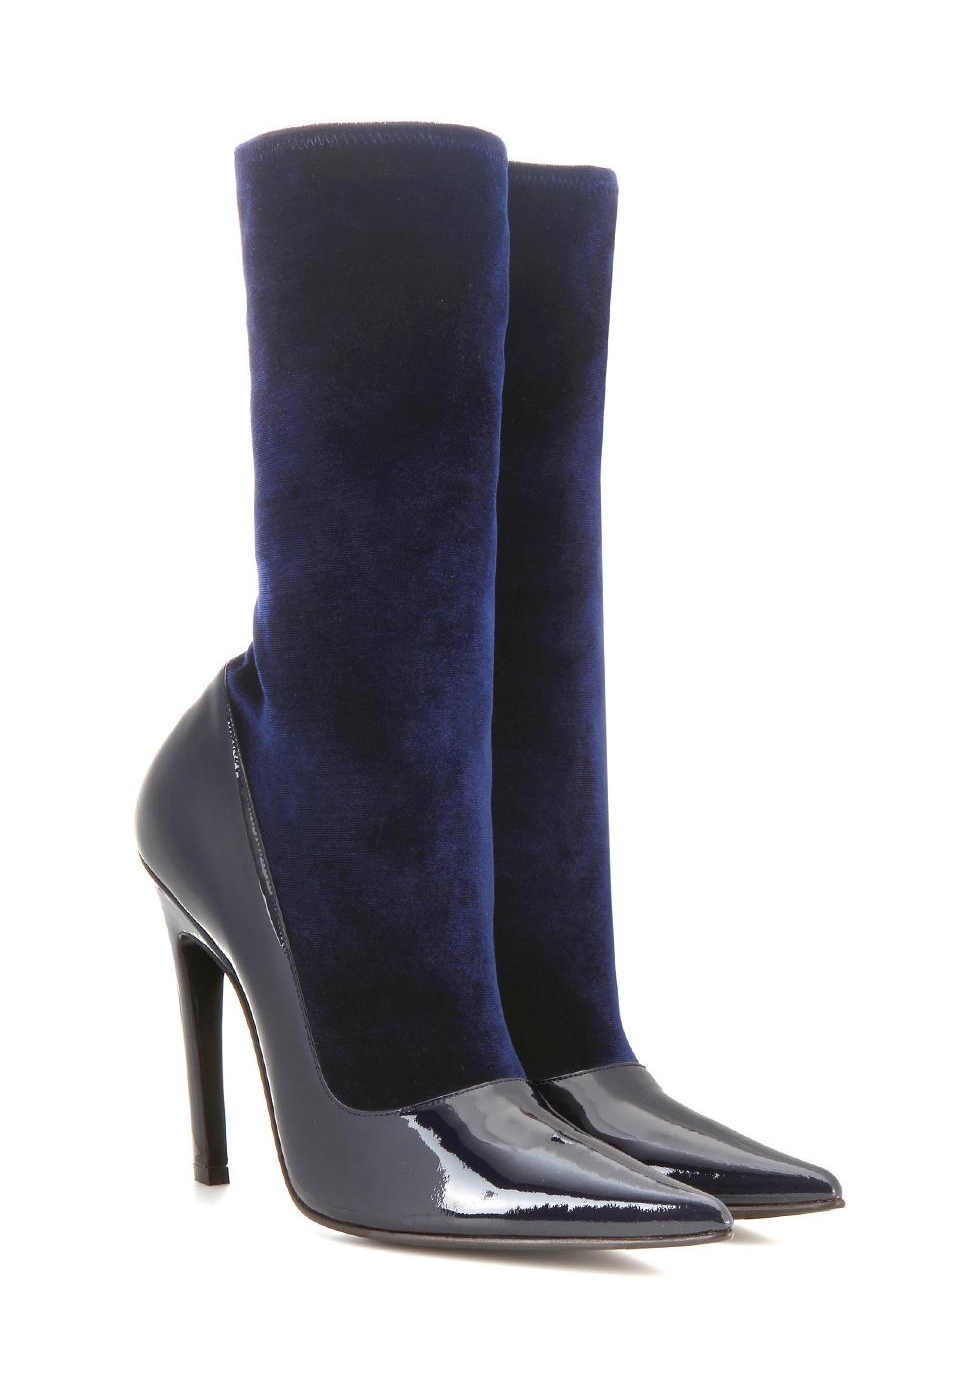 Balenciaga midcalf booties in blue Patent Leather